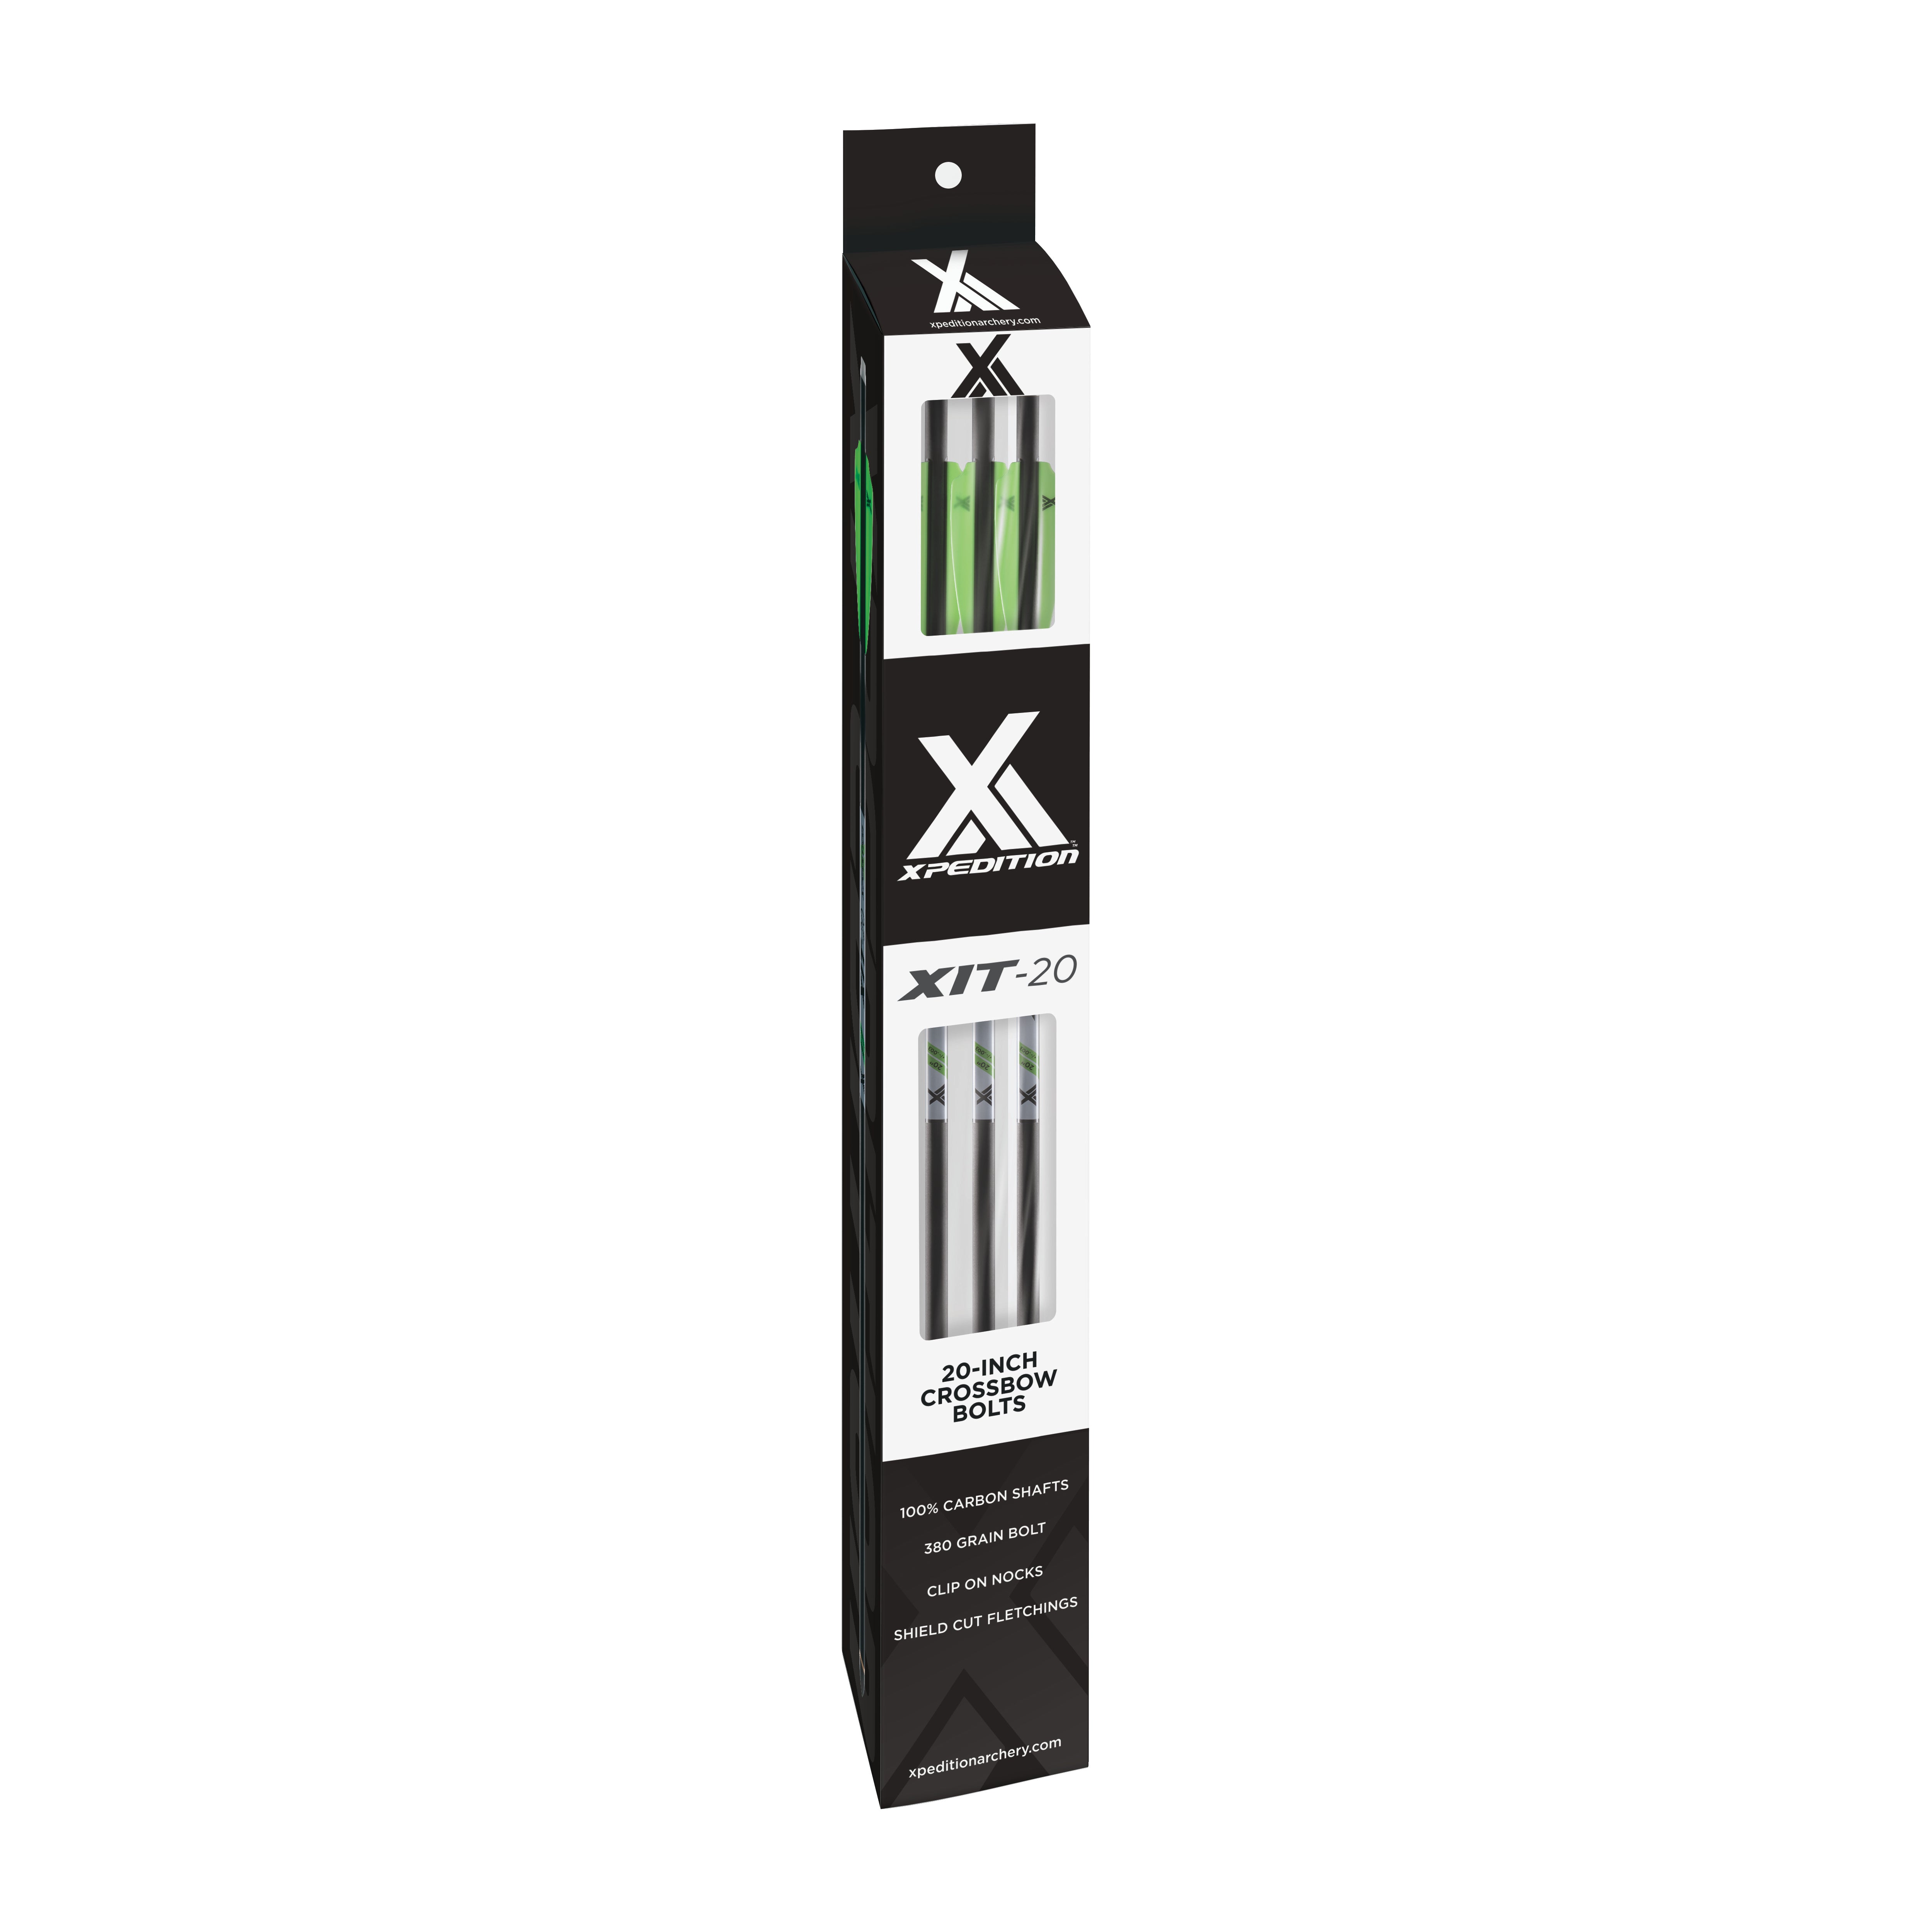 XIT-20 Crossbow Bolts – Xpedition Archery